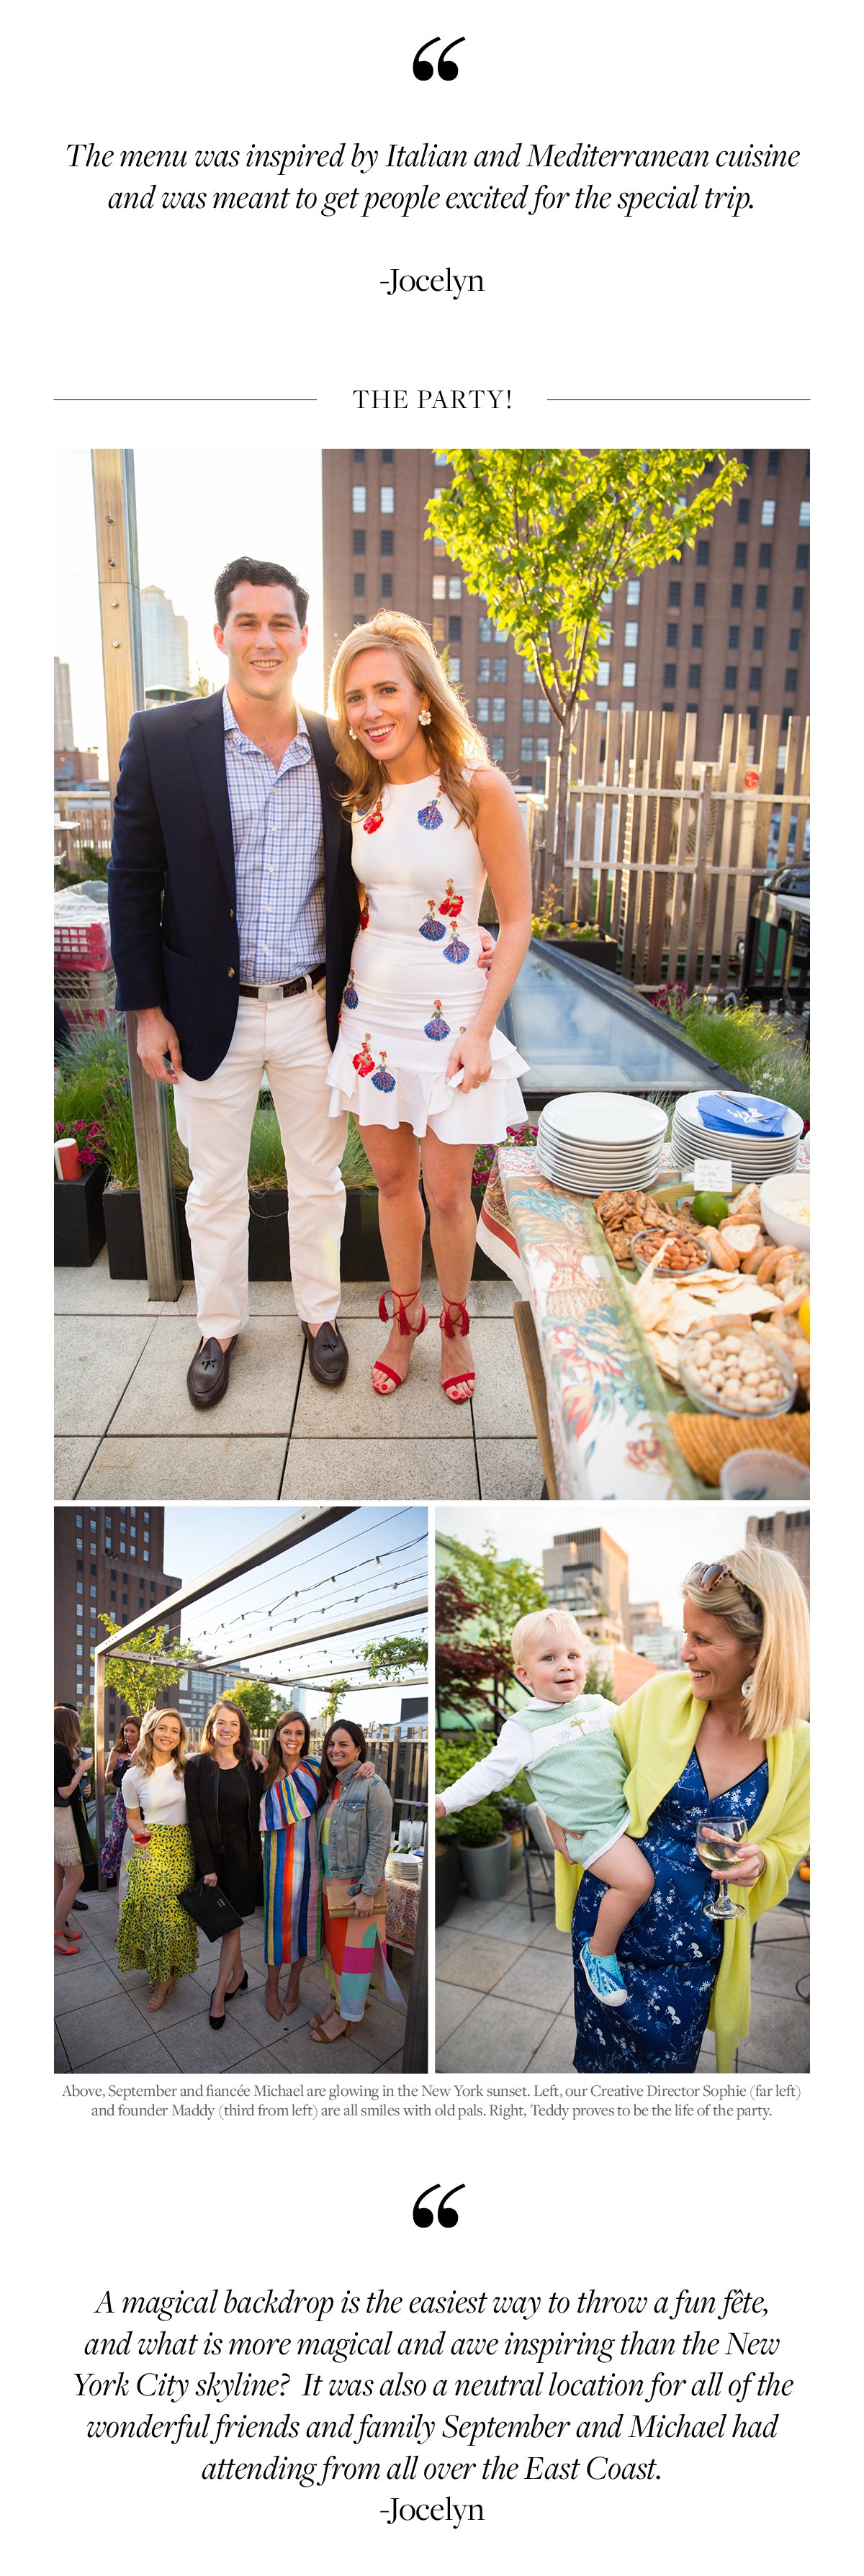 A magical backdrop is the easiest way to throw a fun fête, and what is more magical and awe inspiring than the New York City skyline?  It was also a neutral location for all of the wonderful friends and family September and Michael had attending from all over the East Coast.  -Jocelyn